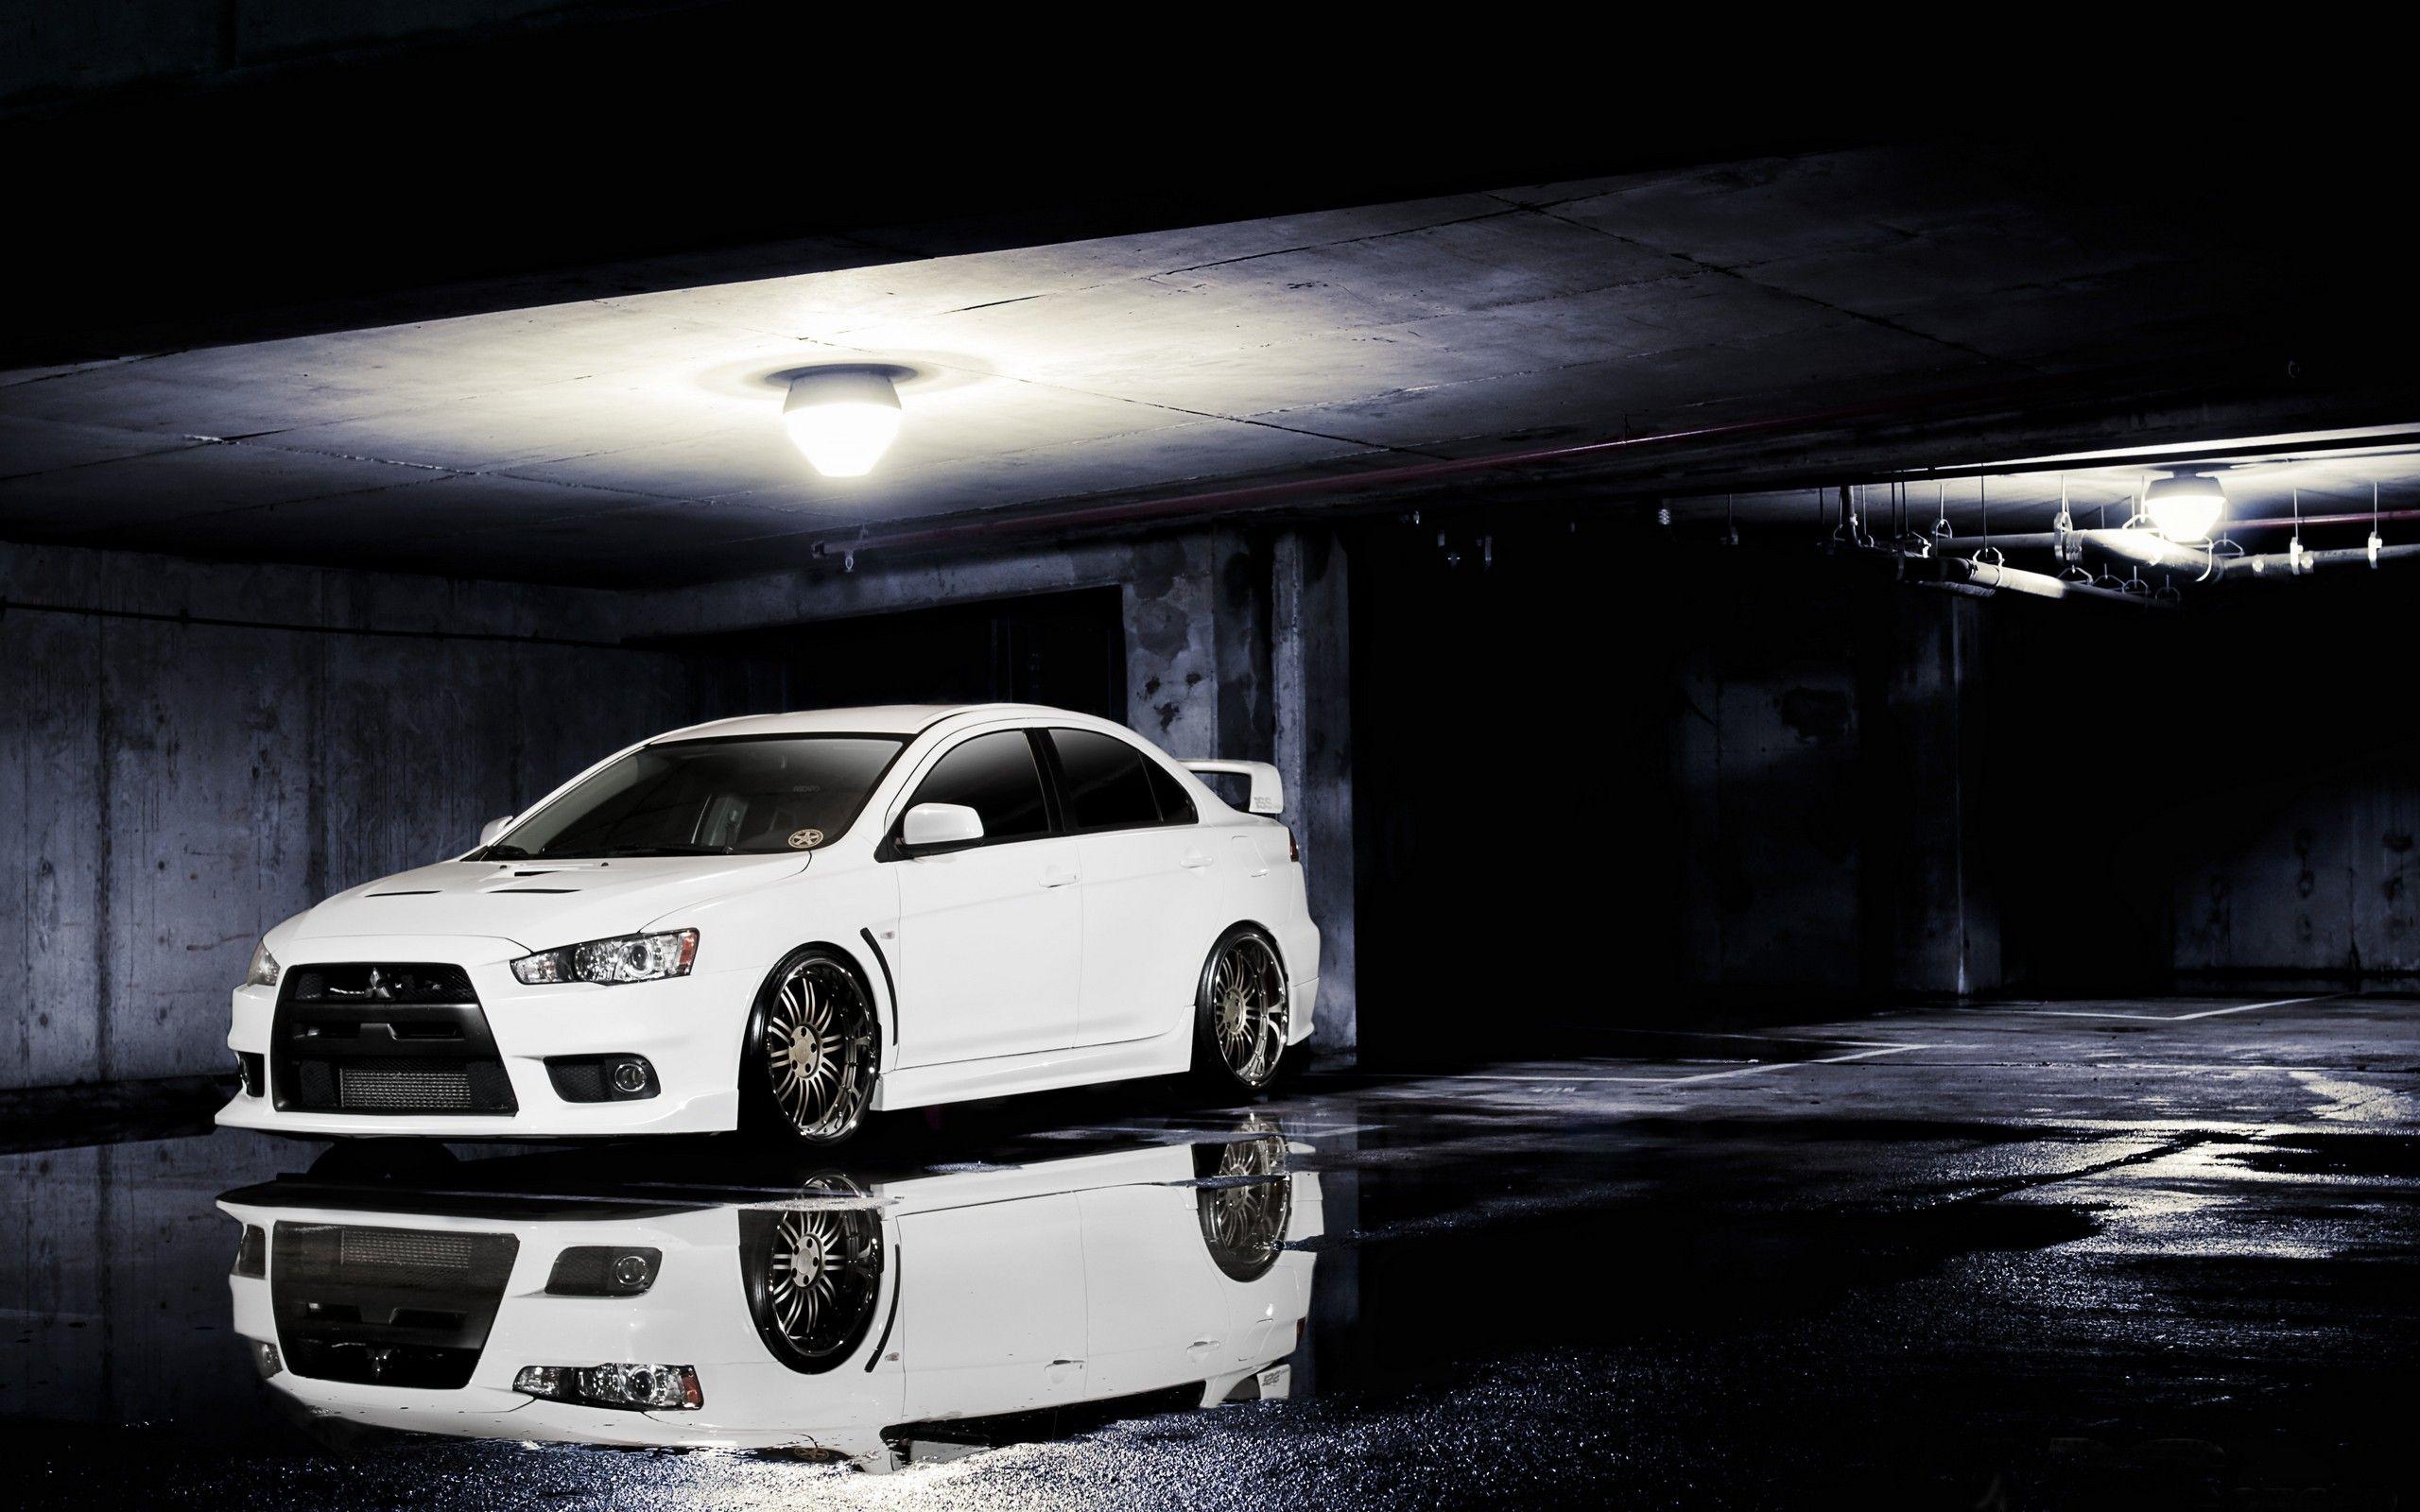 Evo X Backgrounds - Wallpaper Cave